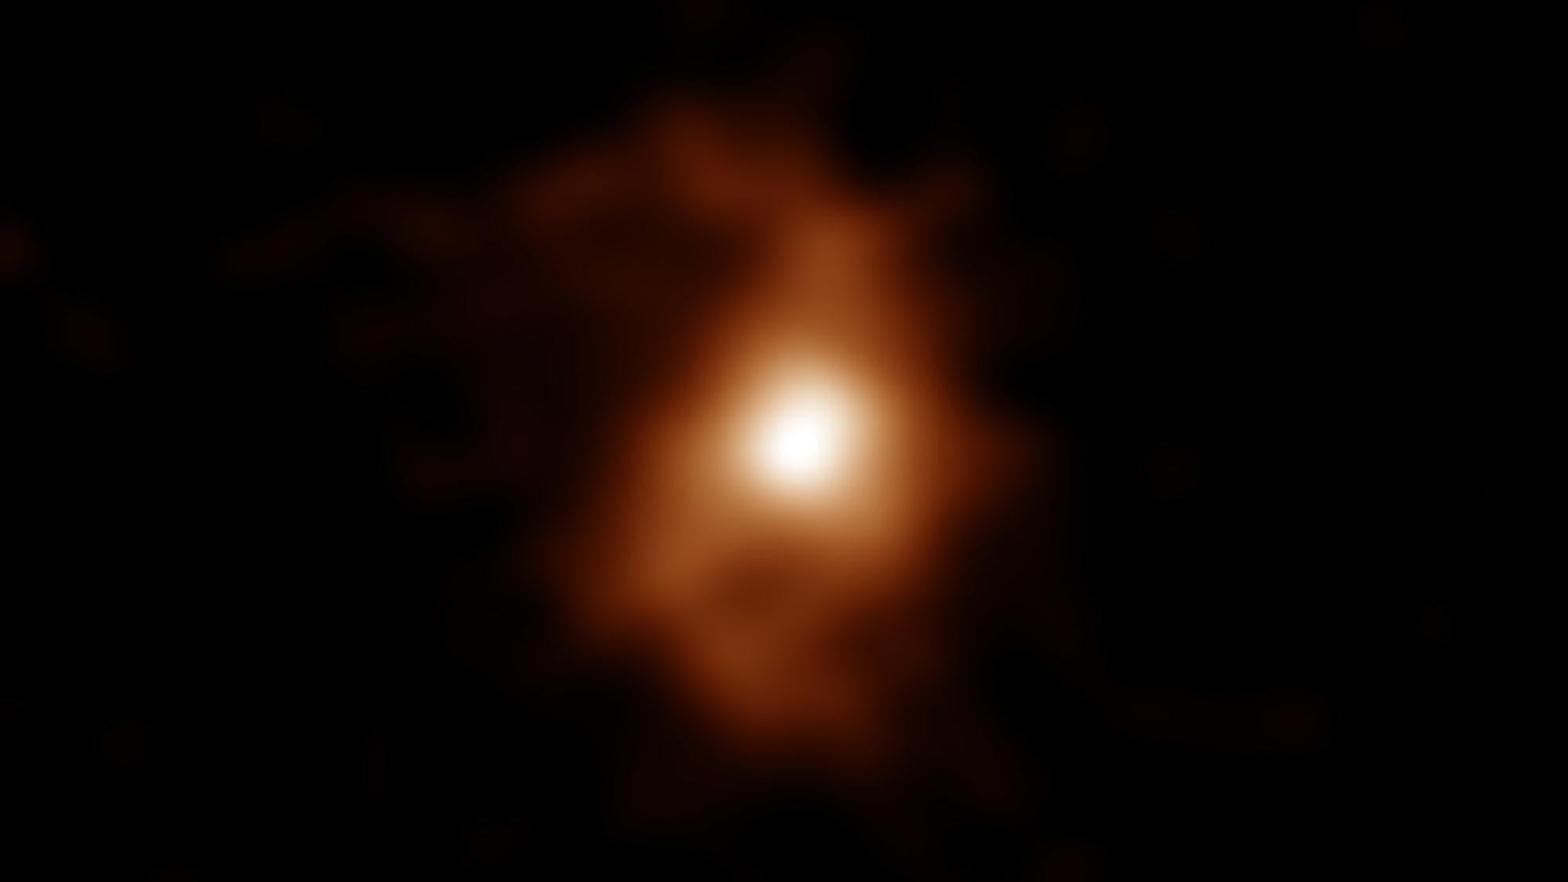 BRI1335-0417, an early galaxy with spiral arm structures. (Image: ALMA (ESO/NAOJ/NRAO), T. Tsukui & S. Iguchi)